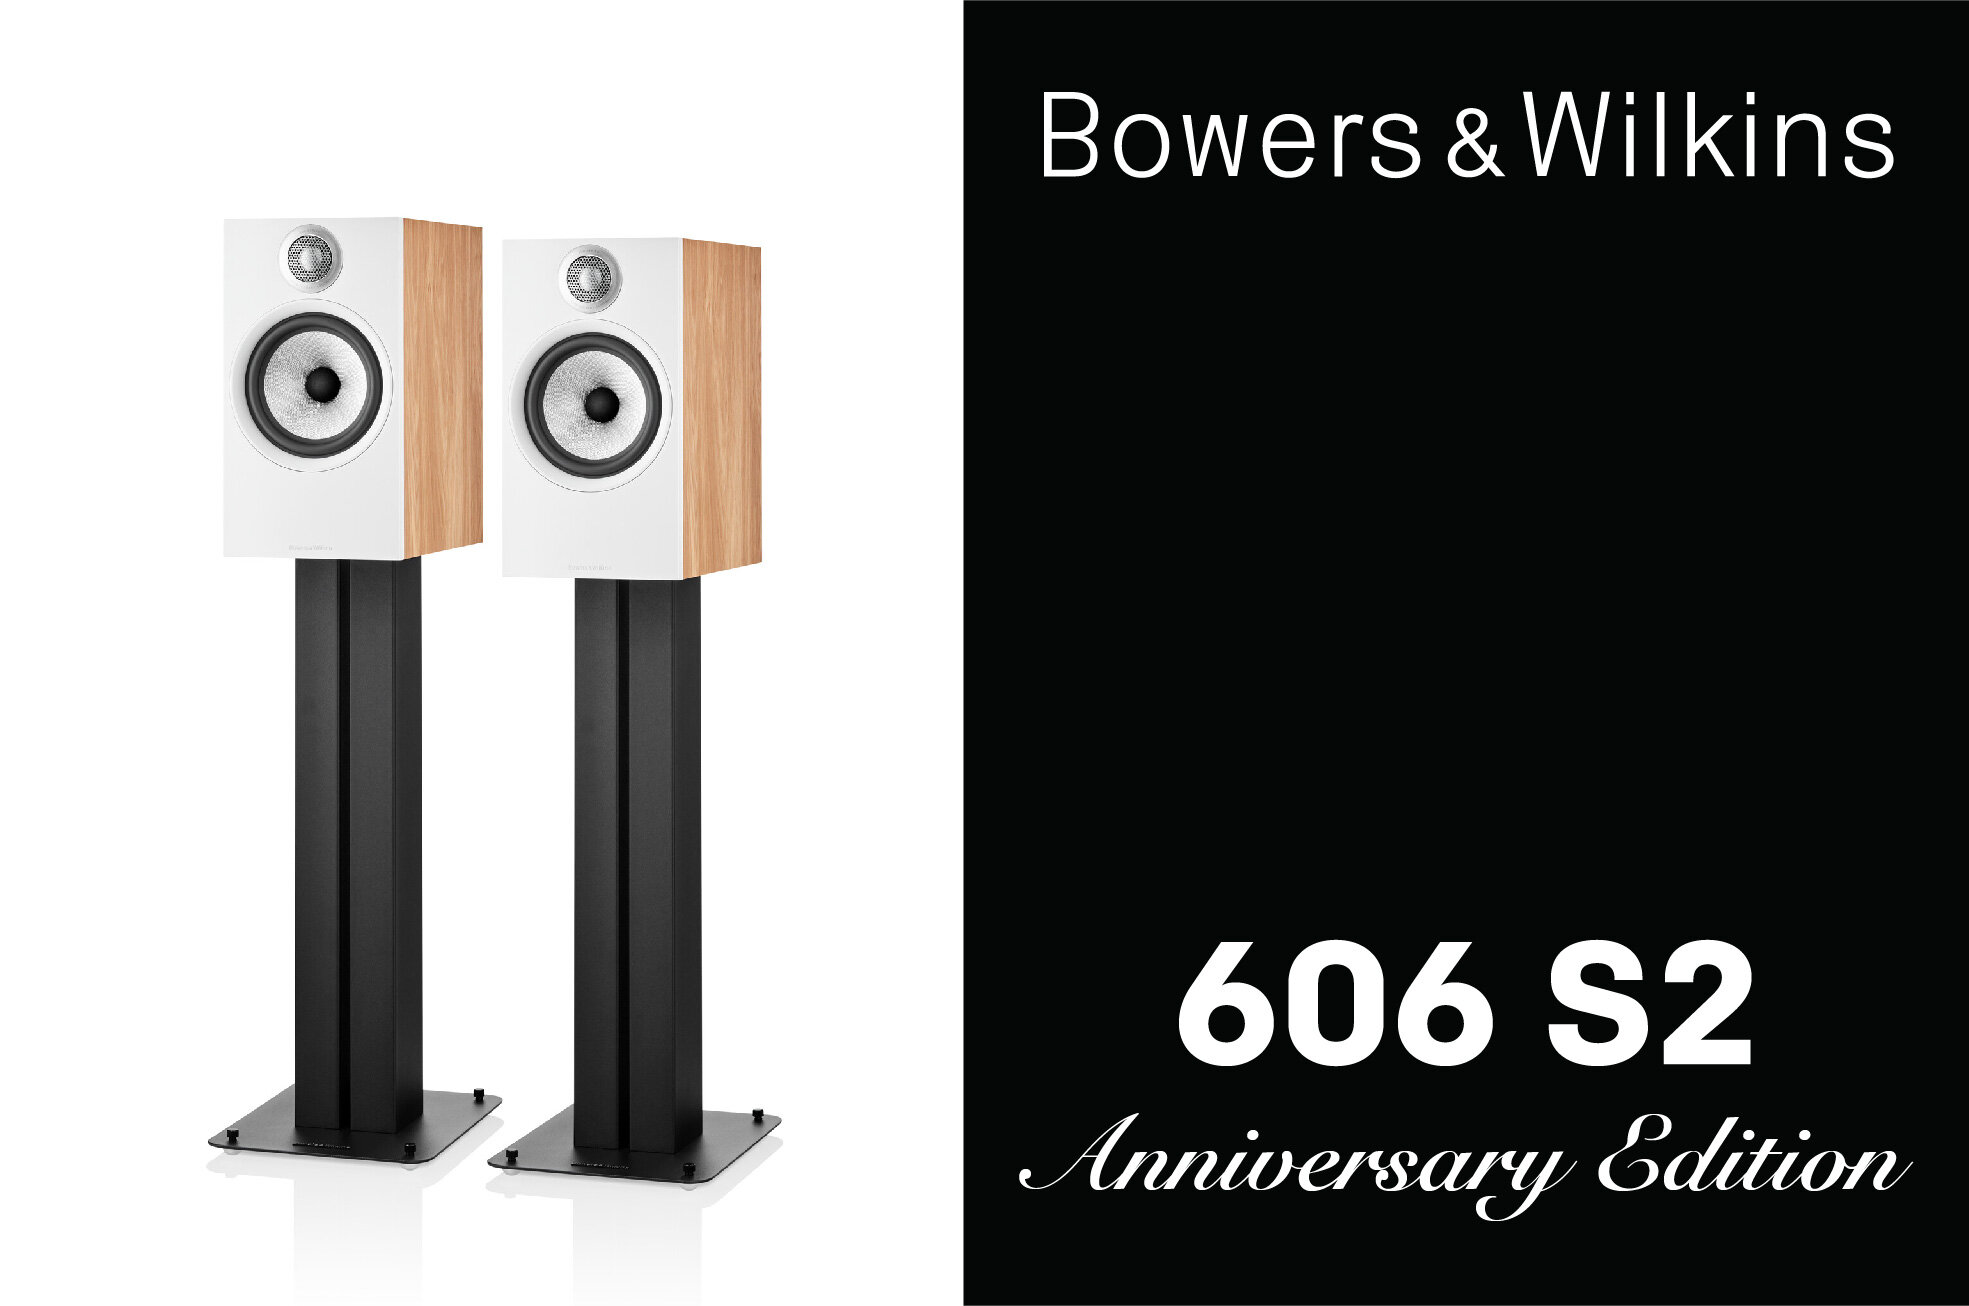 Bowers Wilkins 606 "Anniversary Edition"